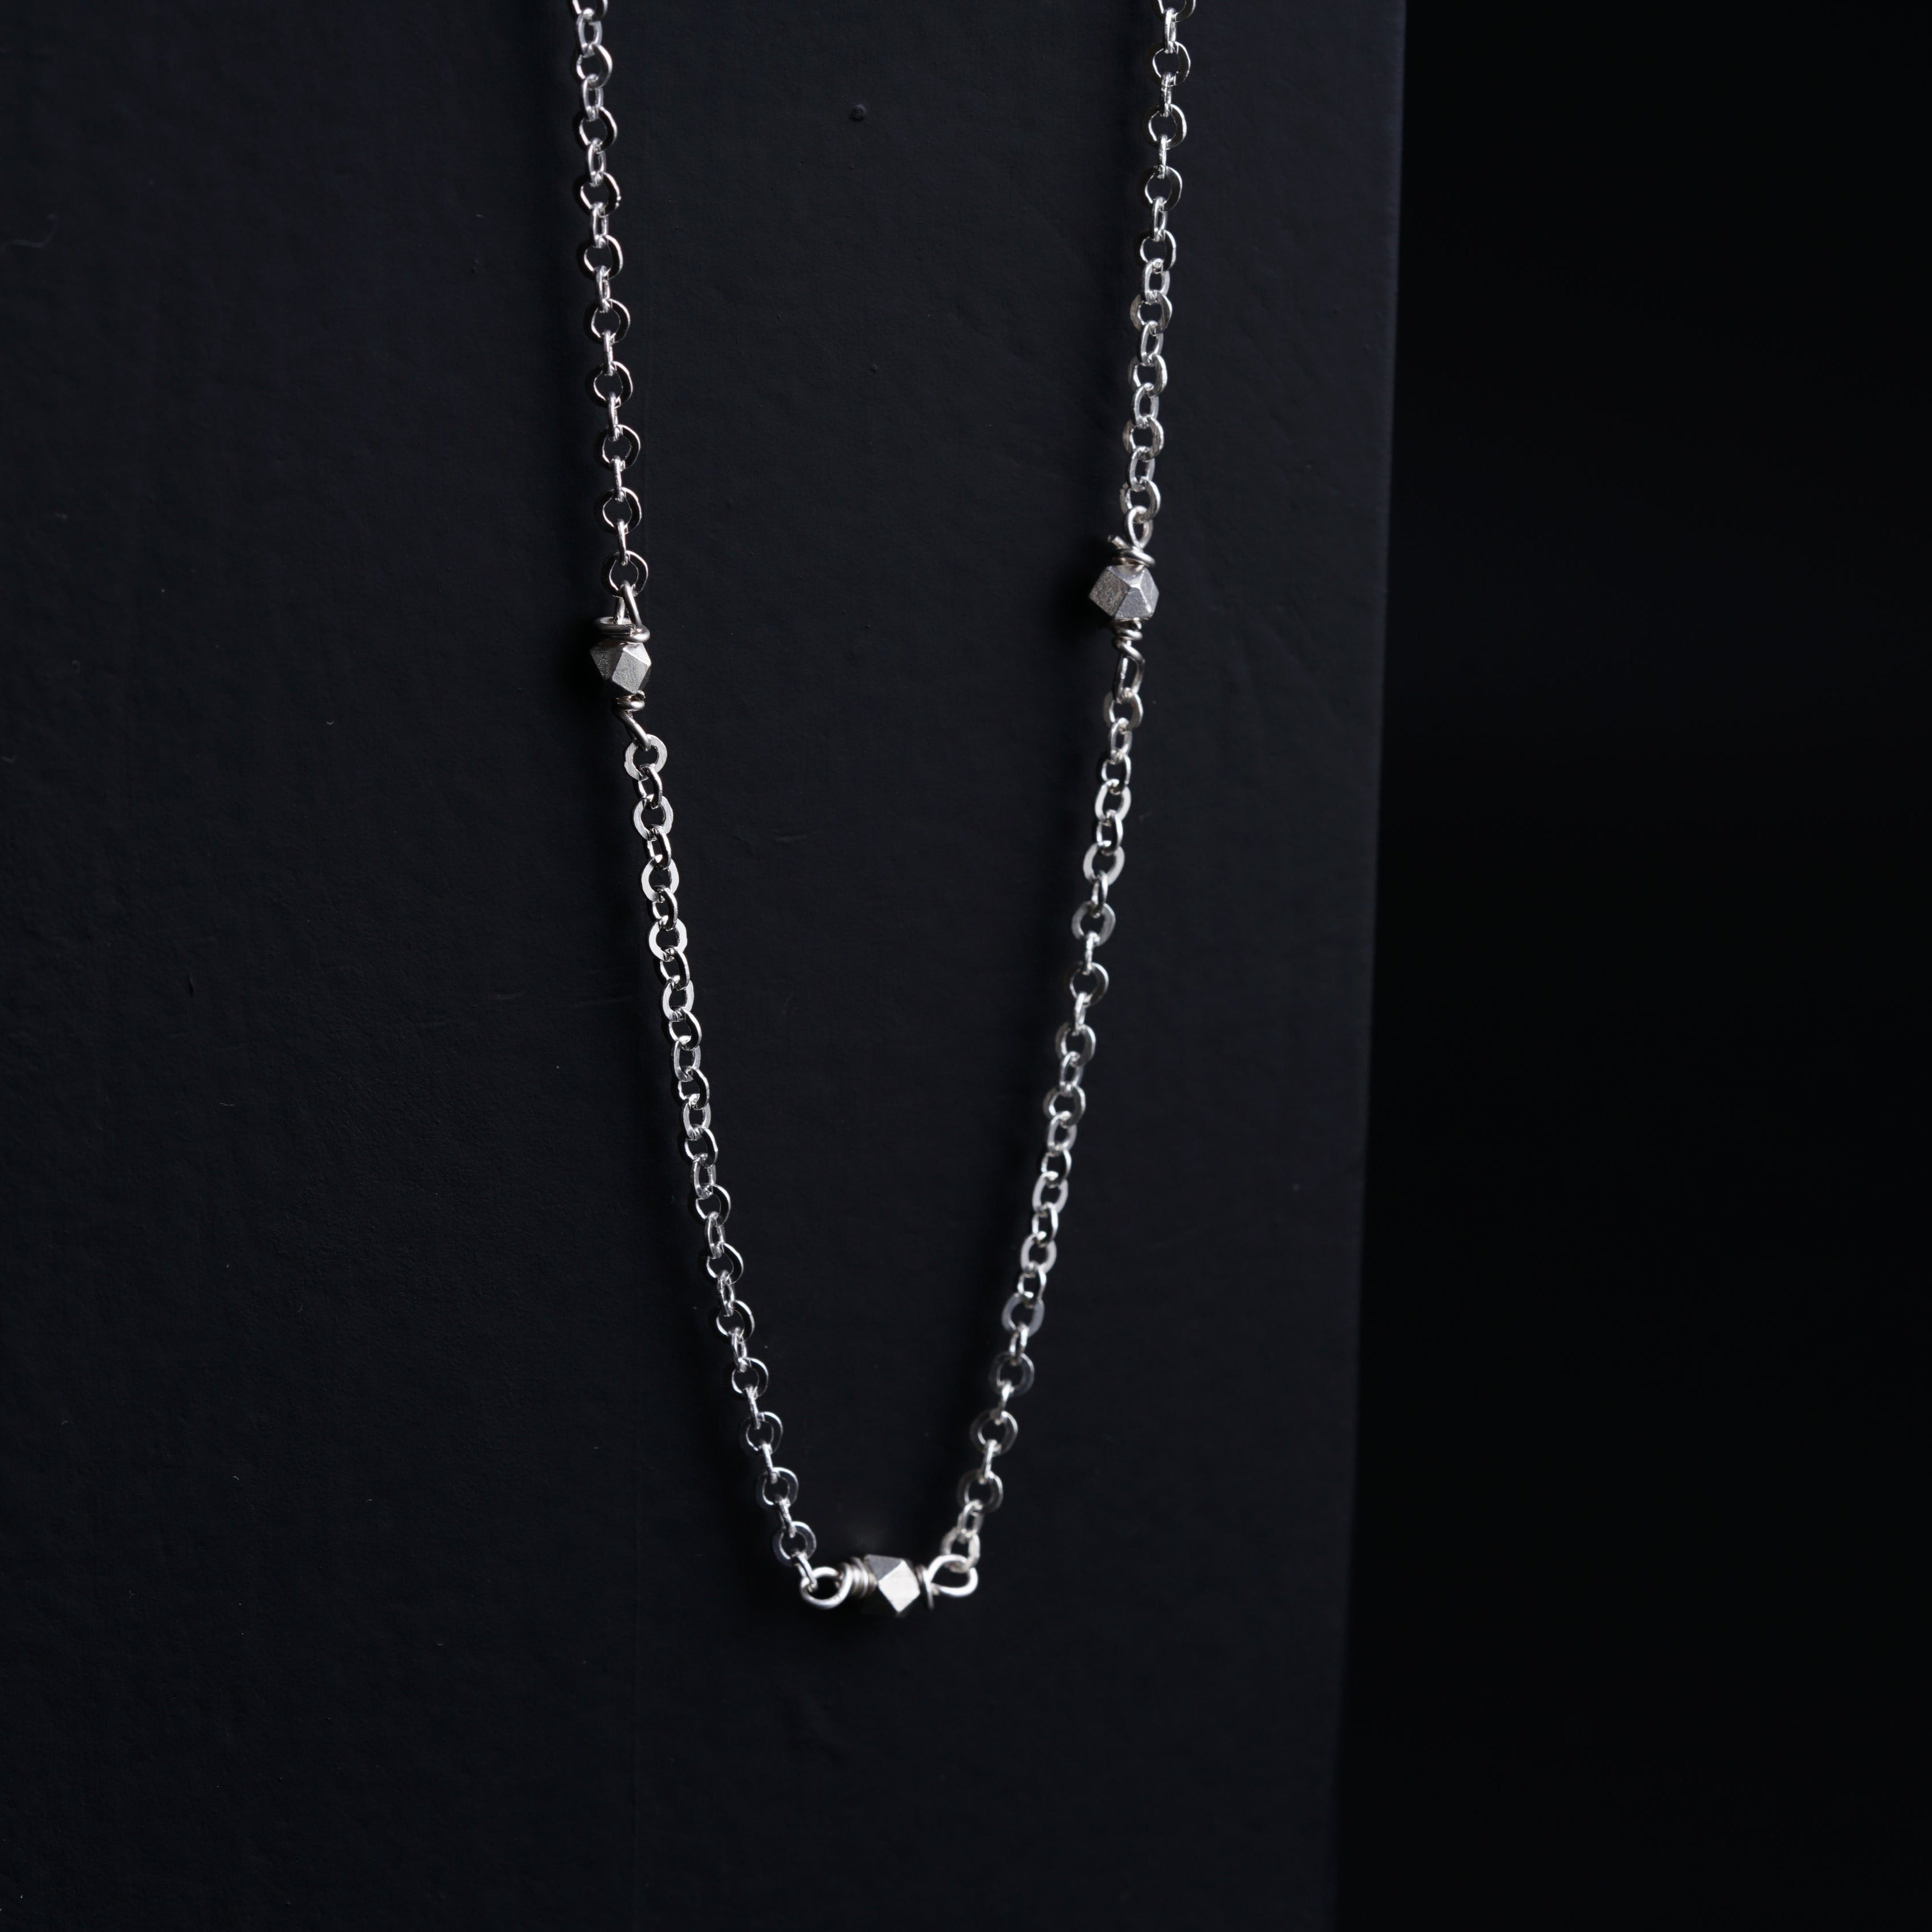 a silver necklace with a bow on a black background